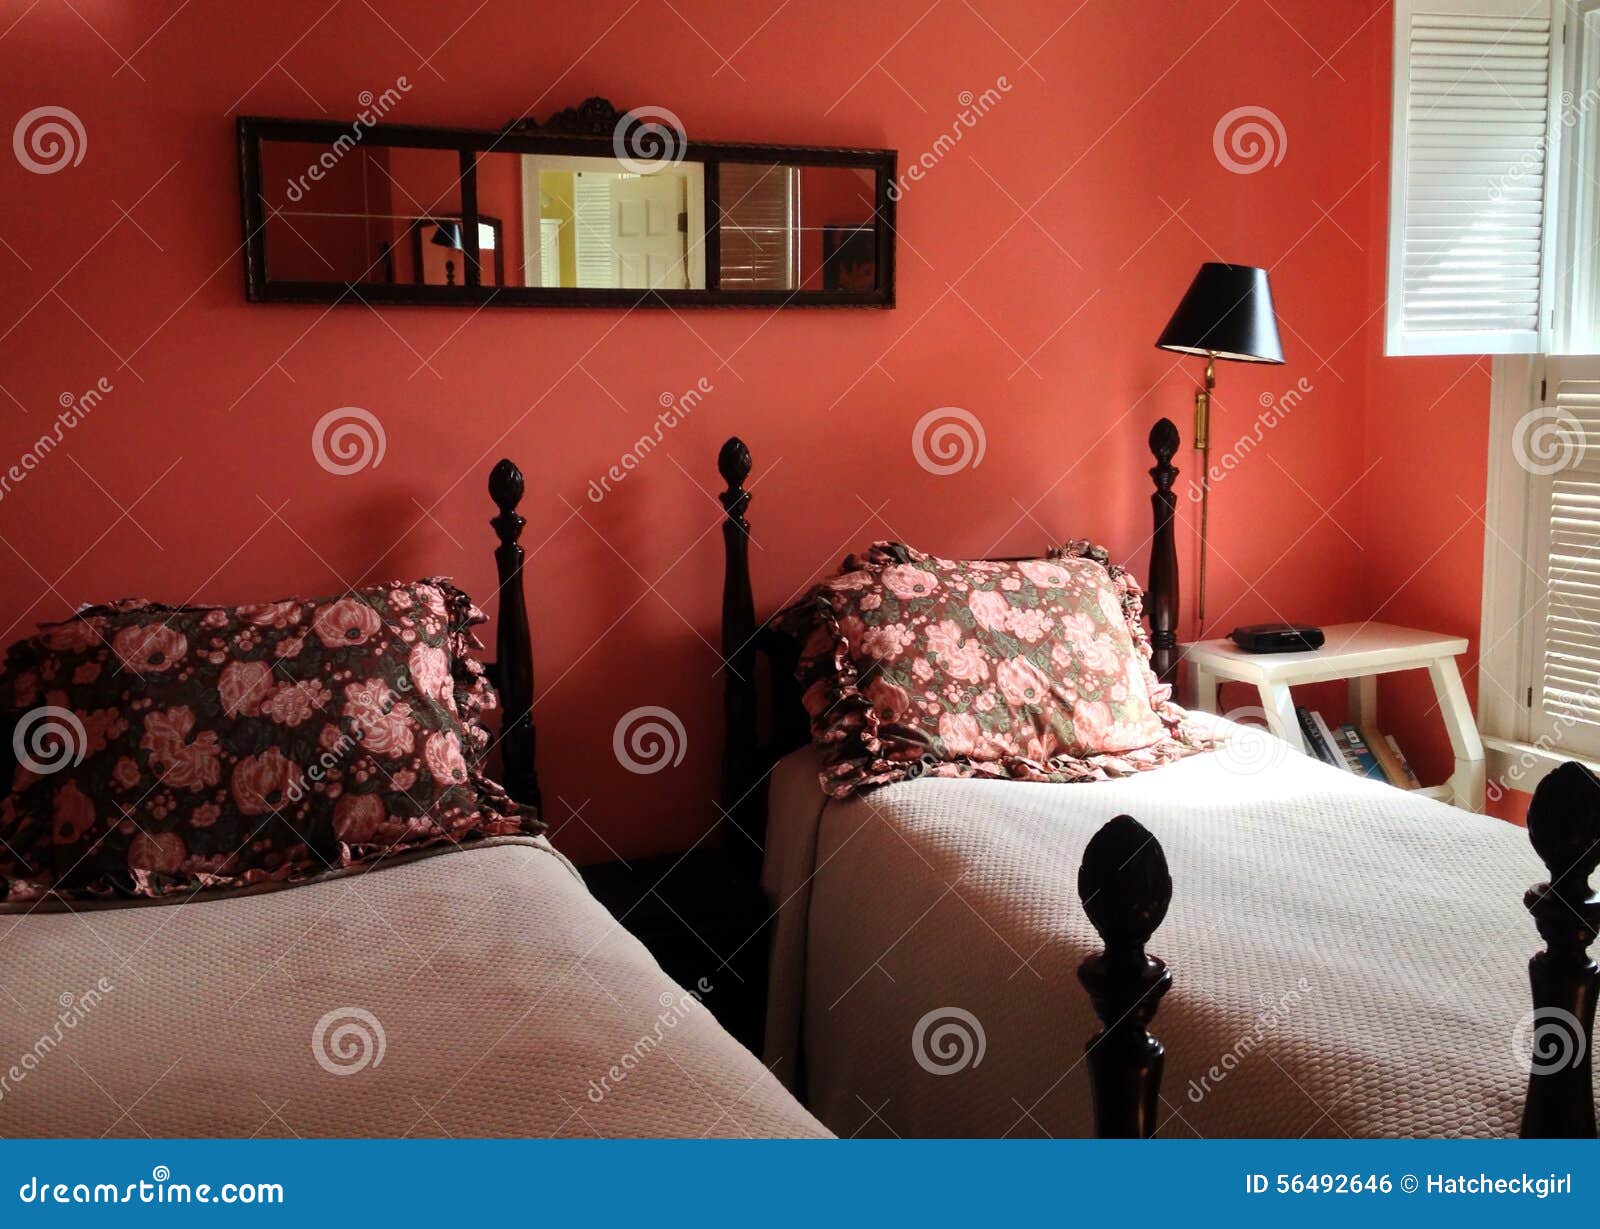 red room; bed and breakfast inn